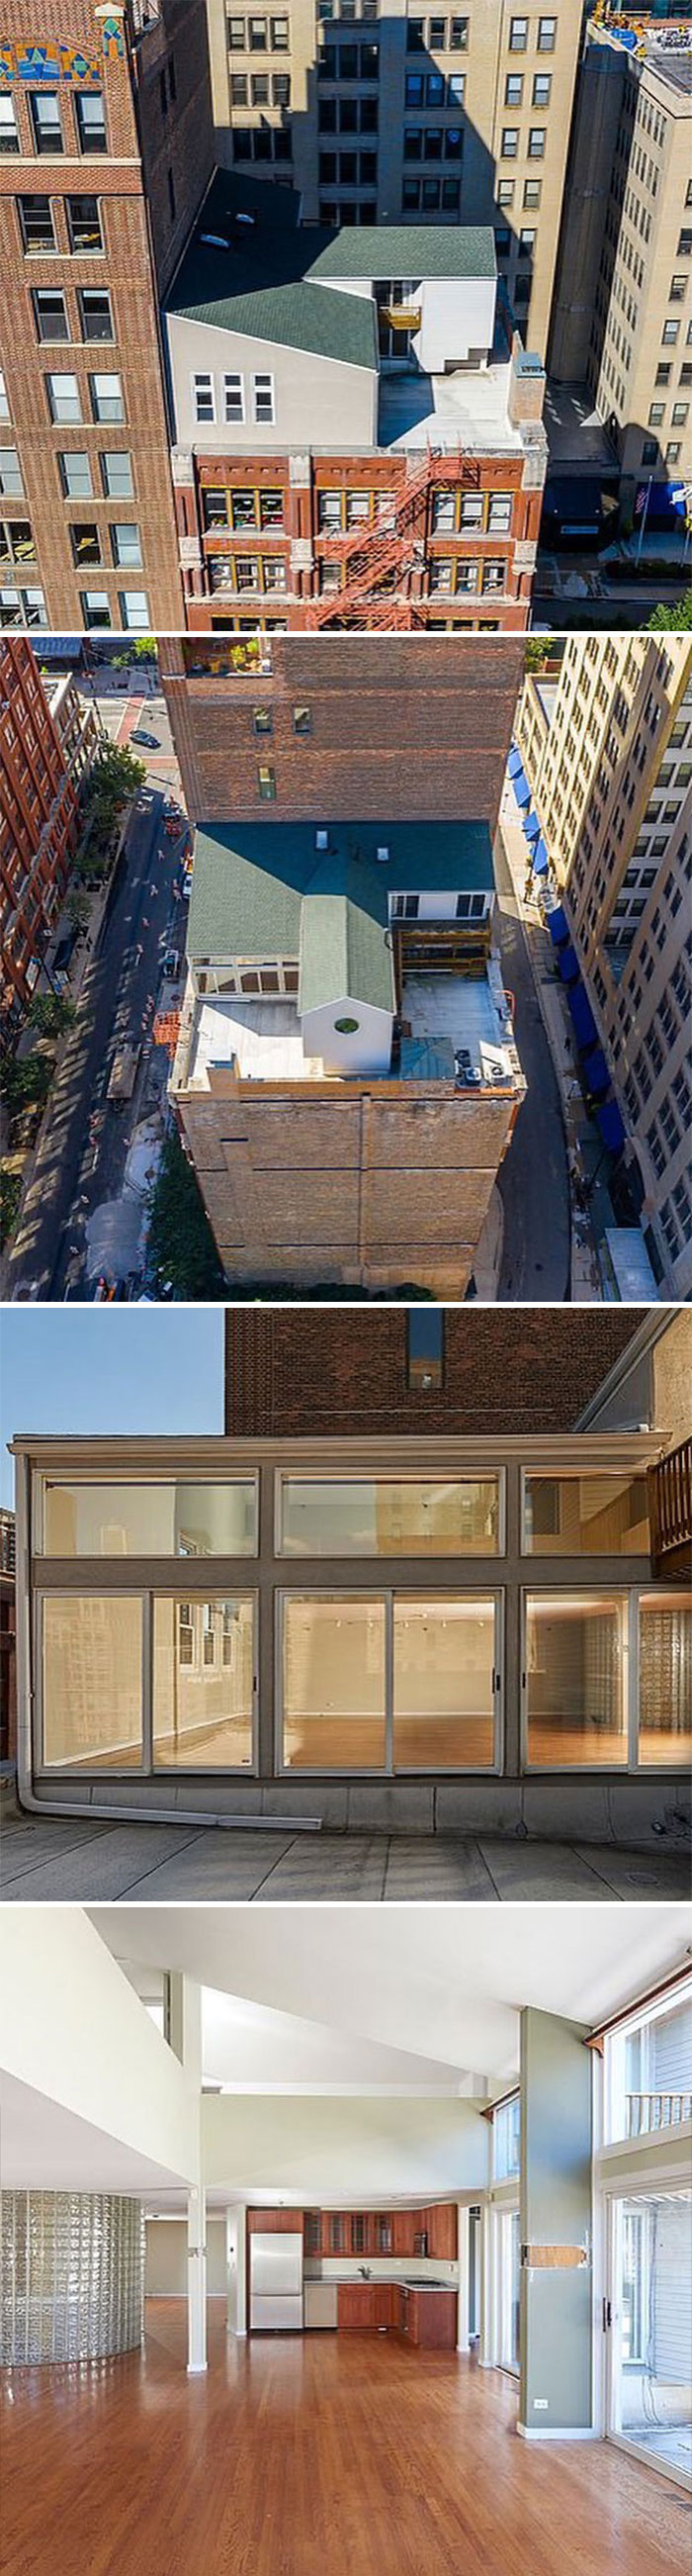 They Built A House On This Roof In Chicago. $699,000